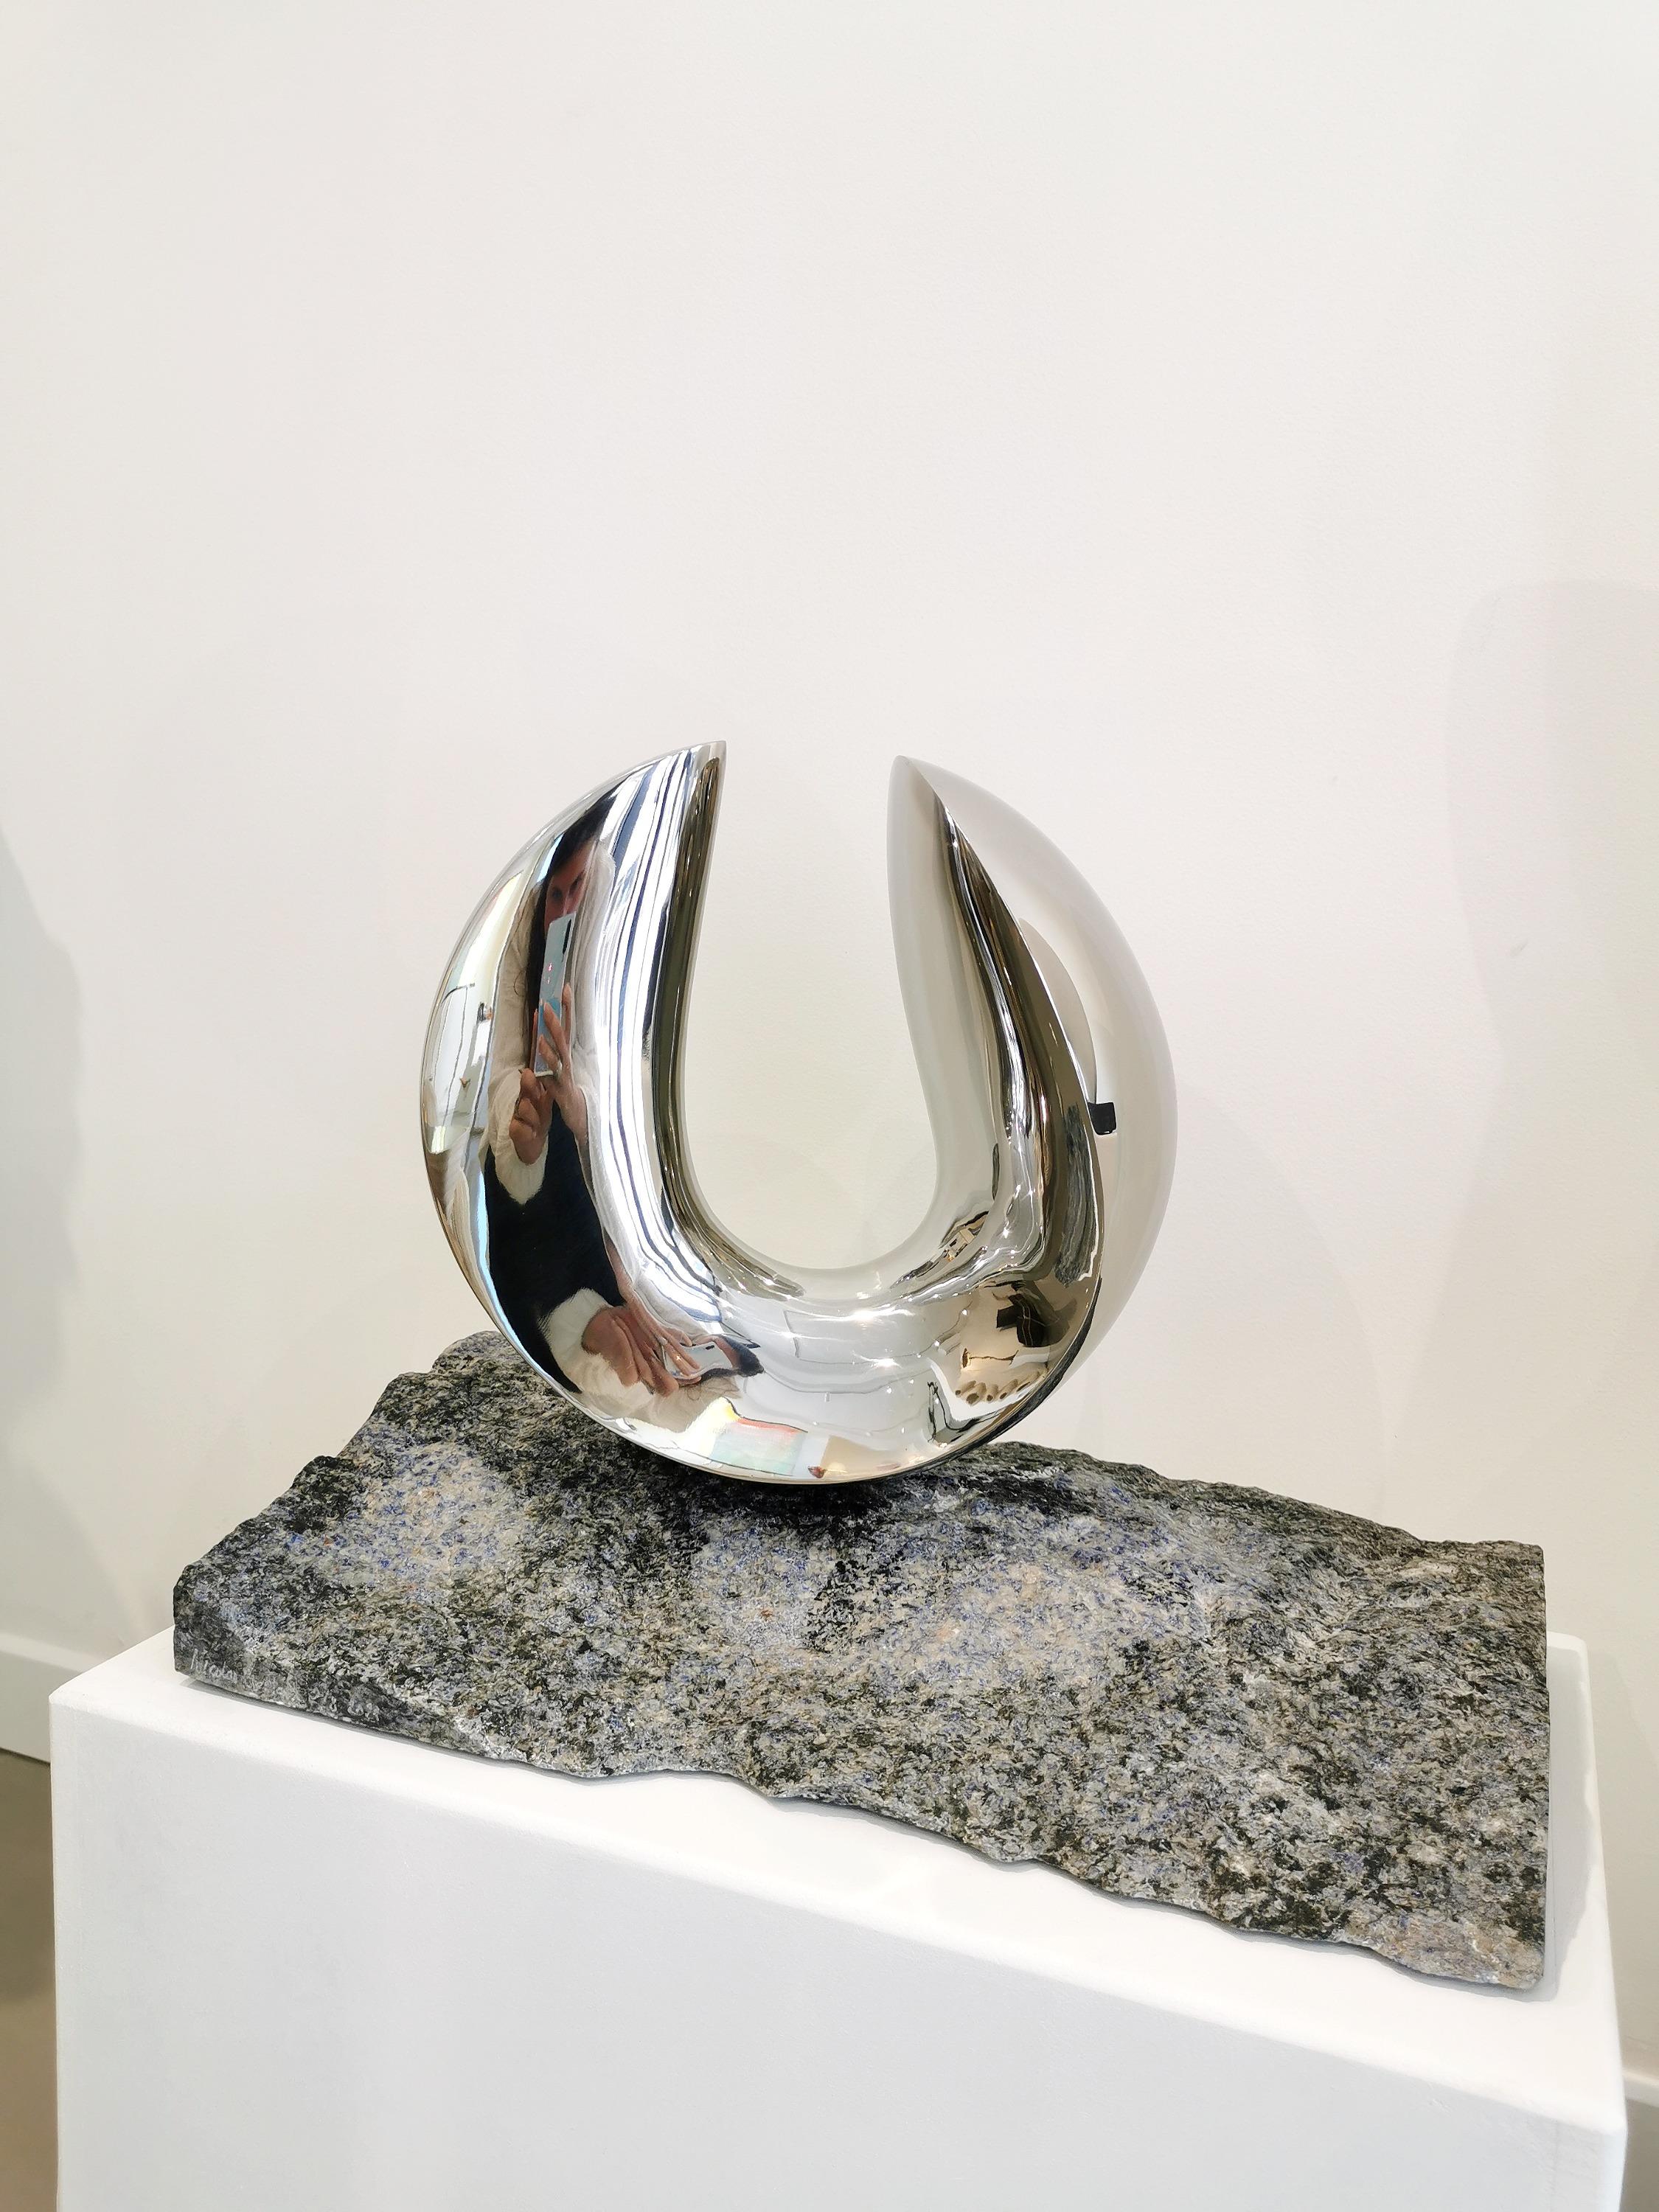 By Nicolas Bertoux
Stainless steel and blue granit base
Measures: 17,70’’ x 09’’ x 13,40’’
Signed and numbered /8
Delivered with a certificate of authenticity.


RING (THE MONUMENTAL)
Ravaccione Carrara white marble
1,90 x 1,60 x 1,90